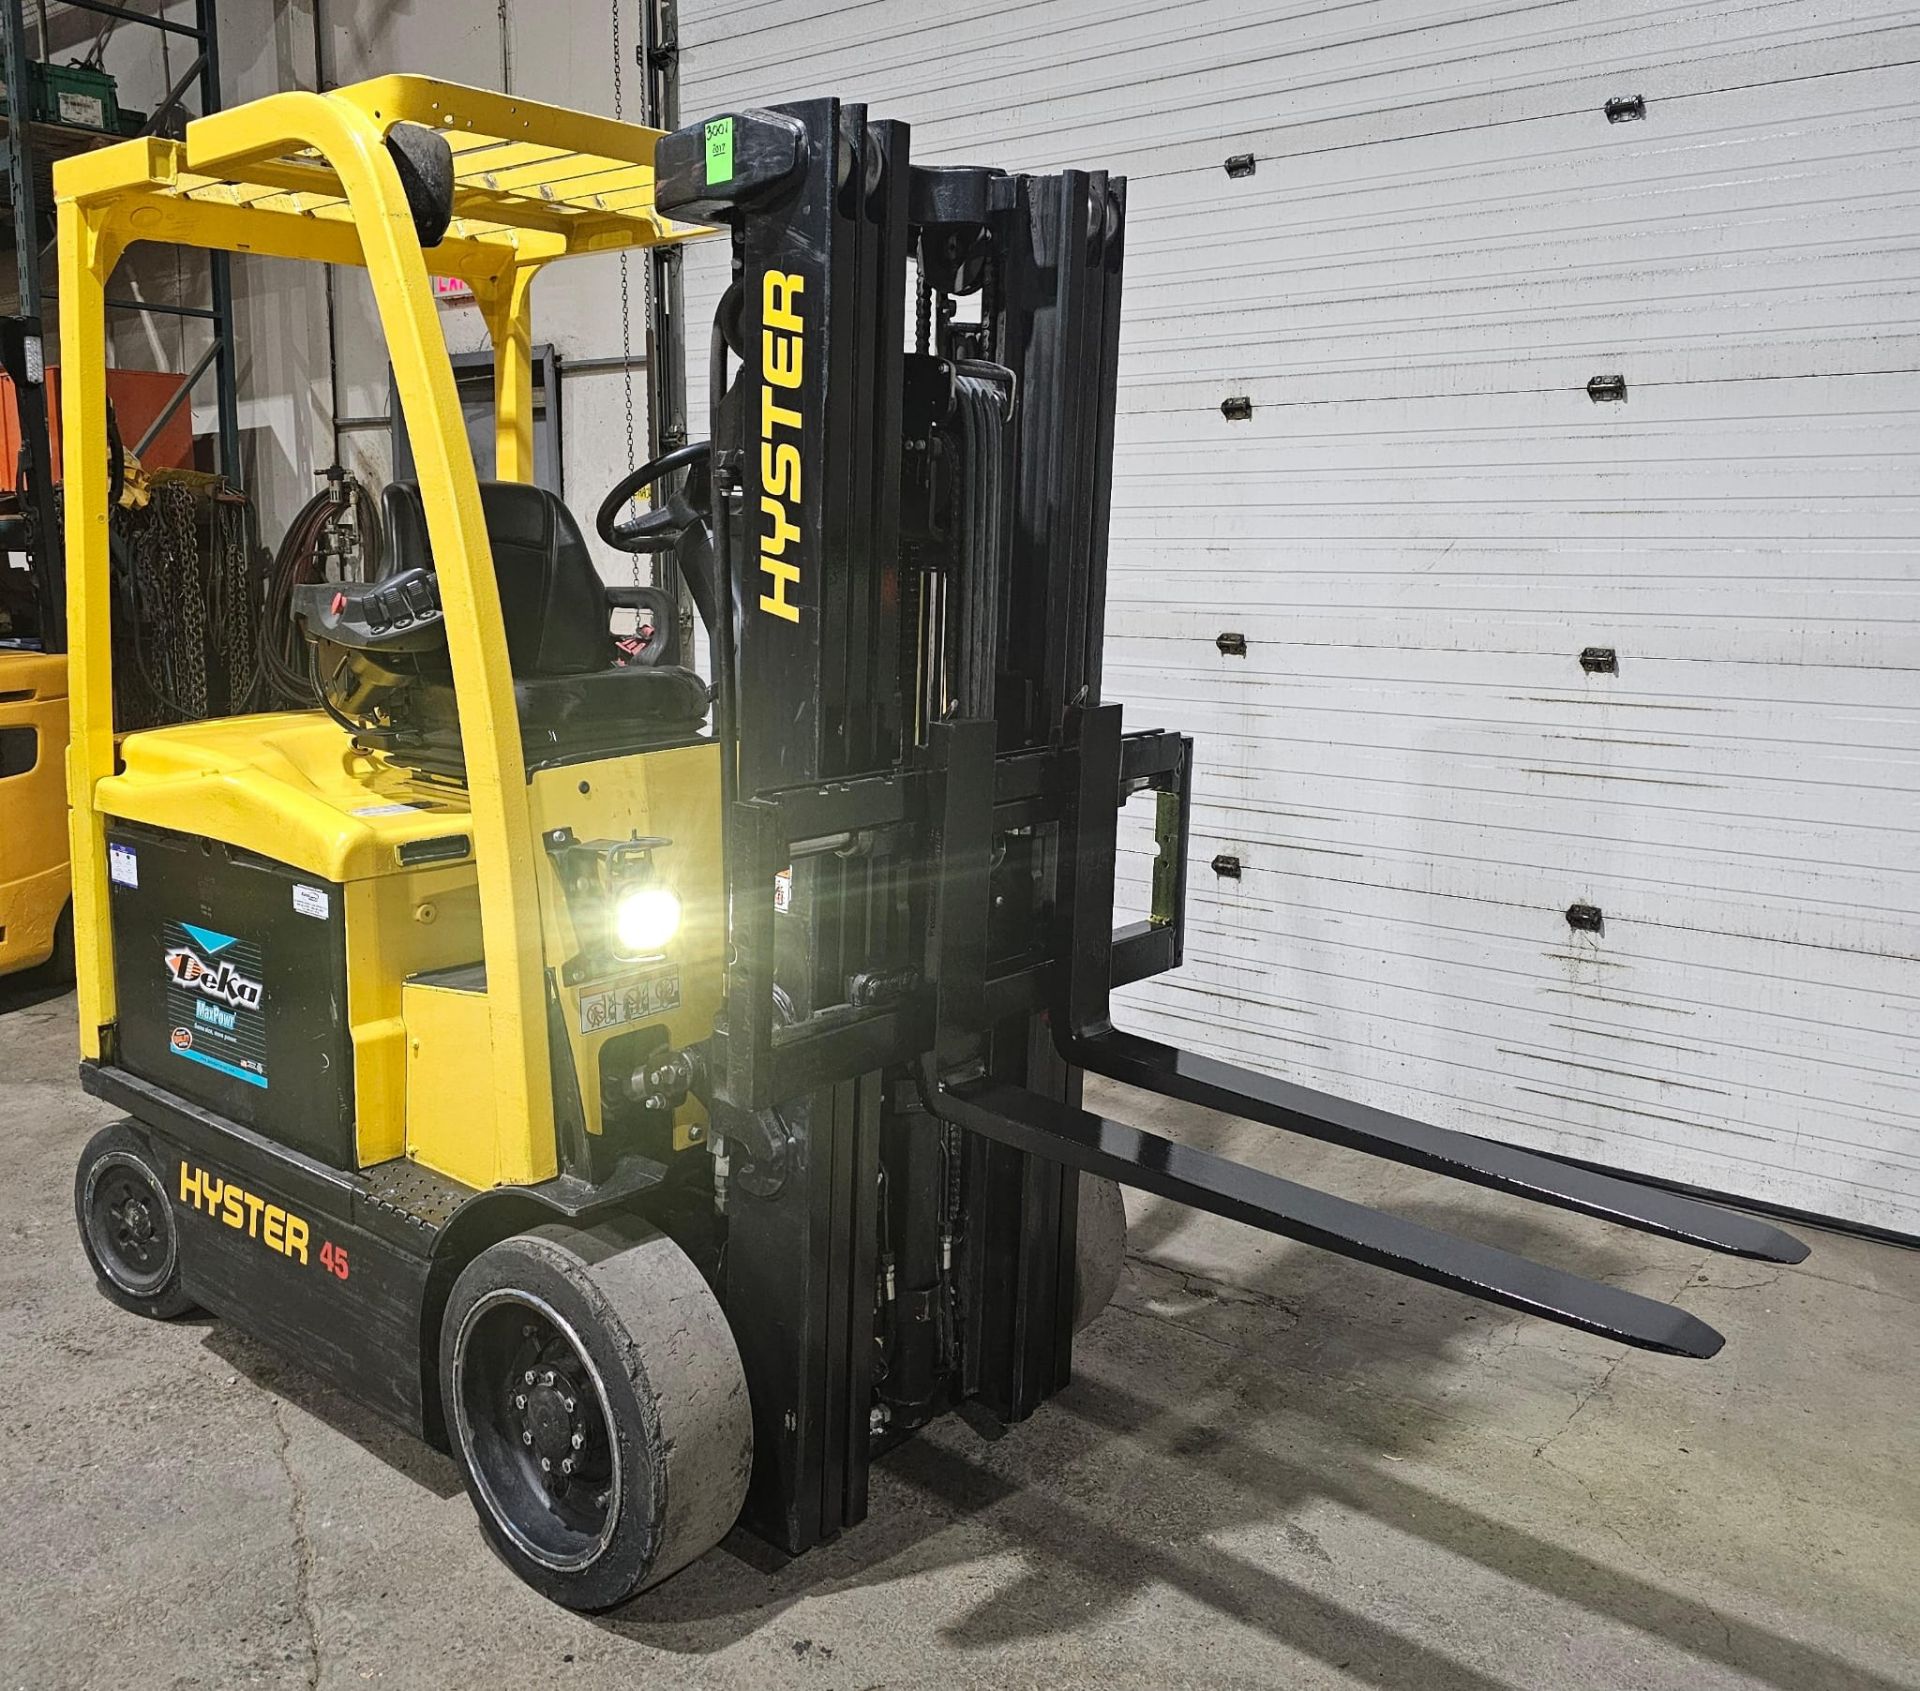 2017 Hyster 4,500lbs Capacity Forklift Electric 48V with sideshift & 3-STAGE MAST 187" load height - Image 6 of 7